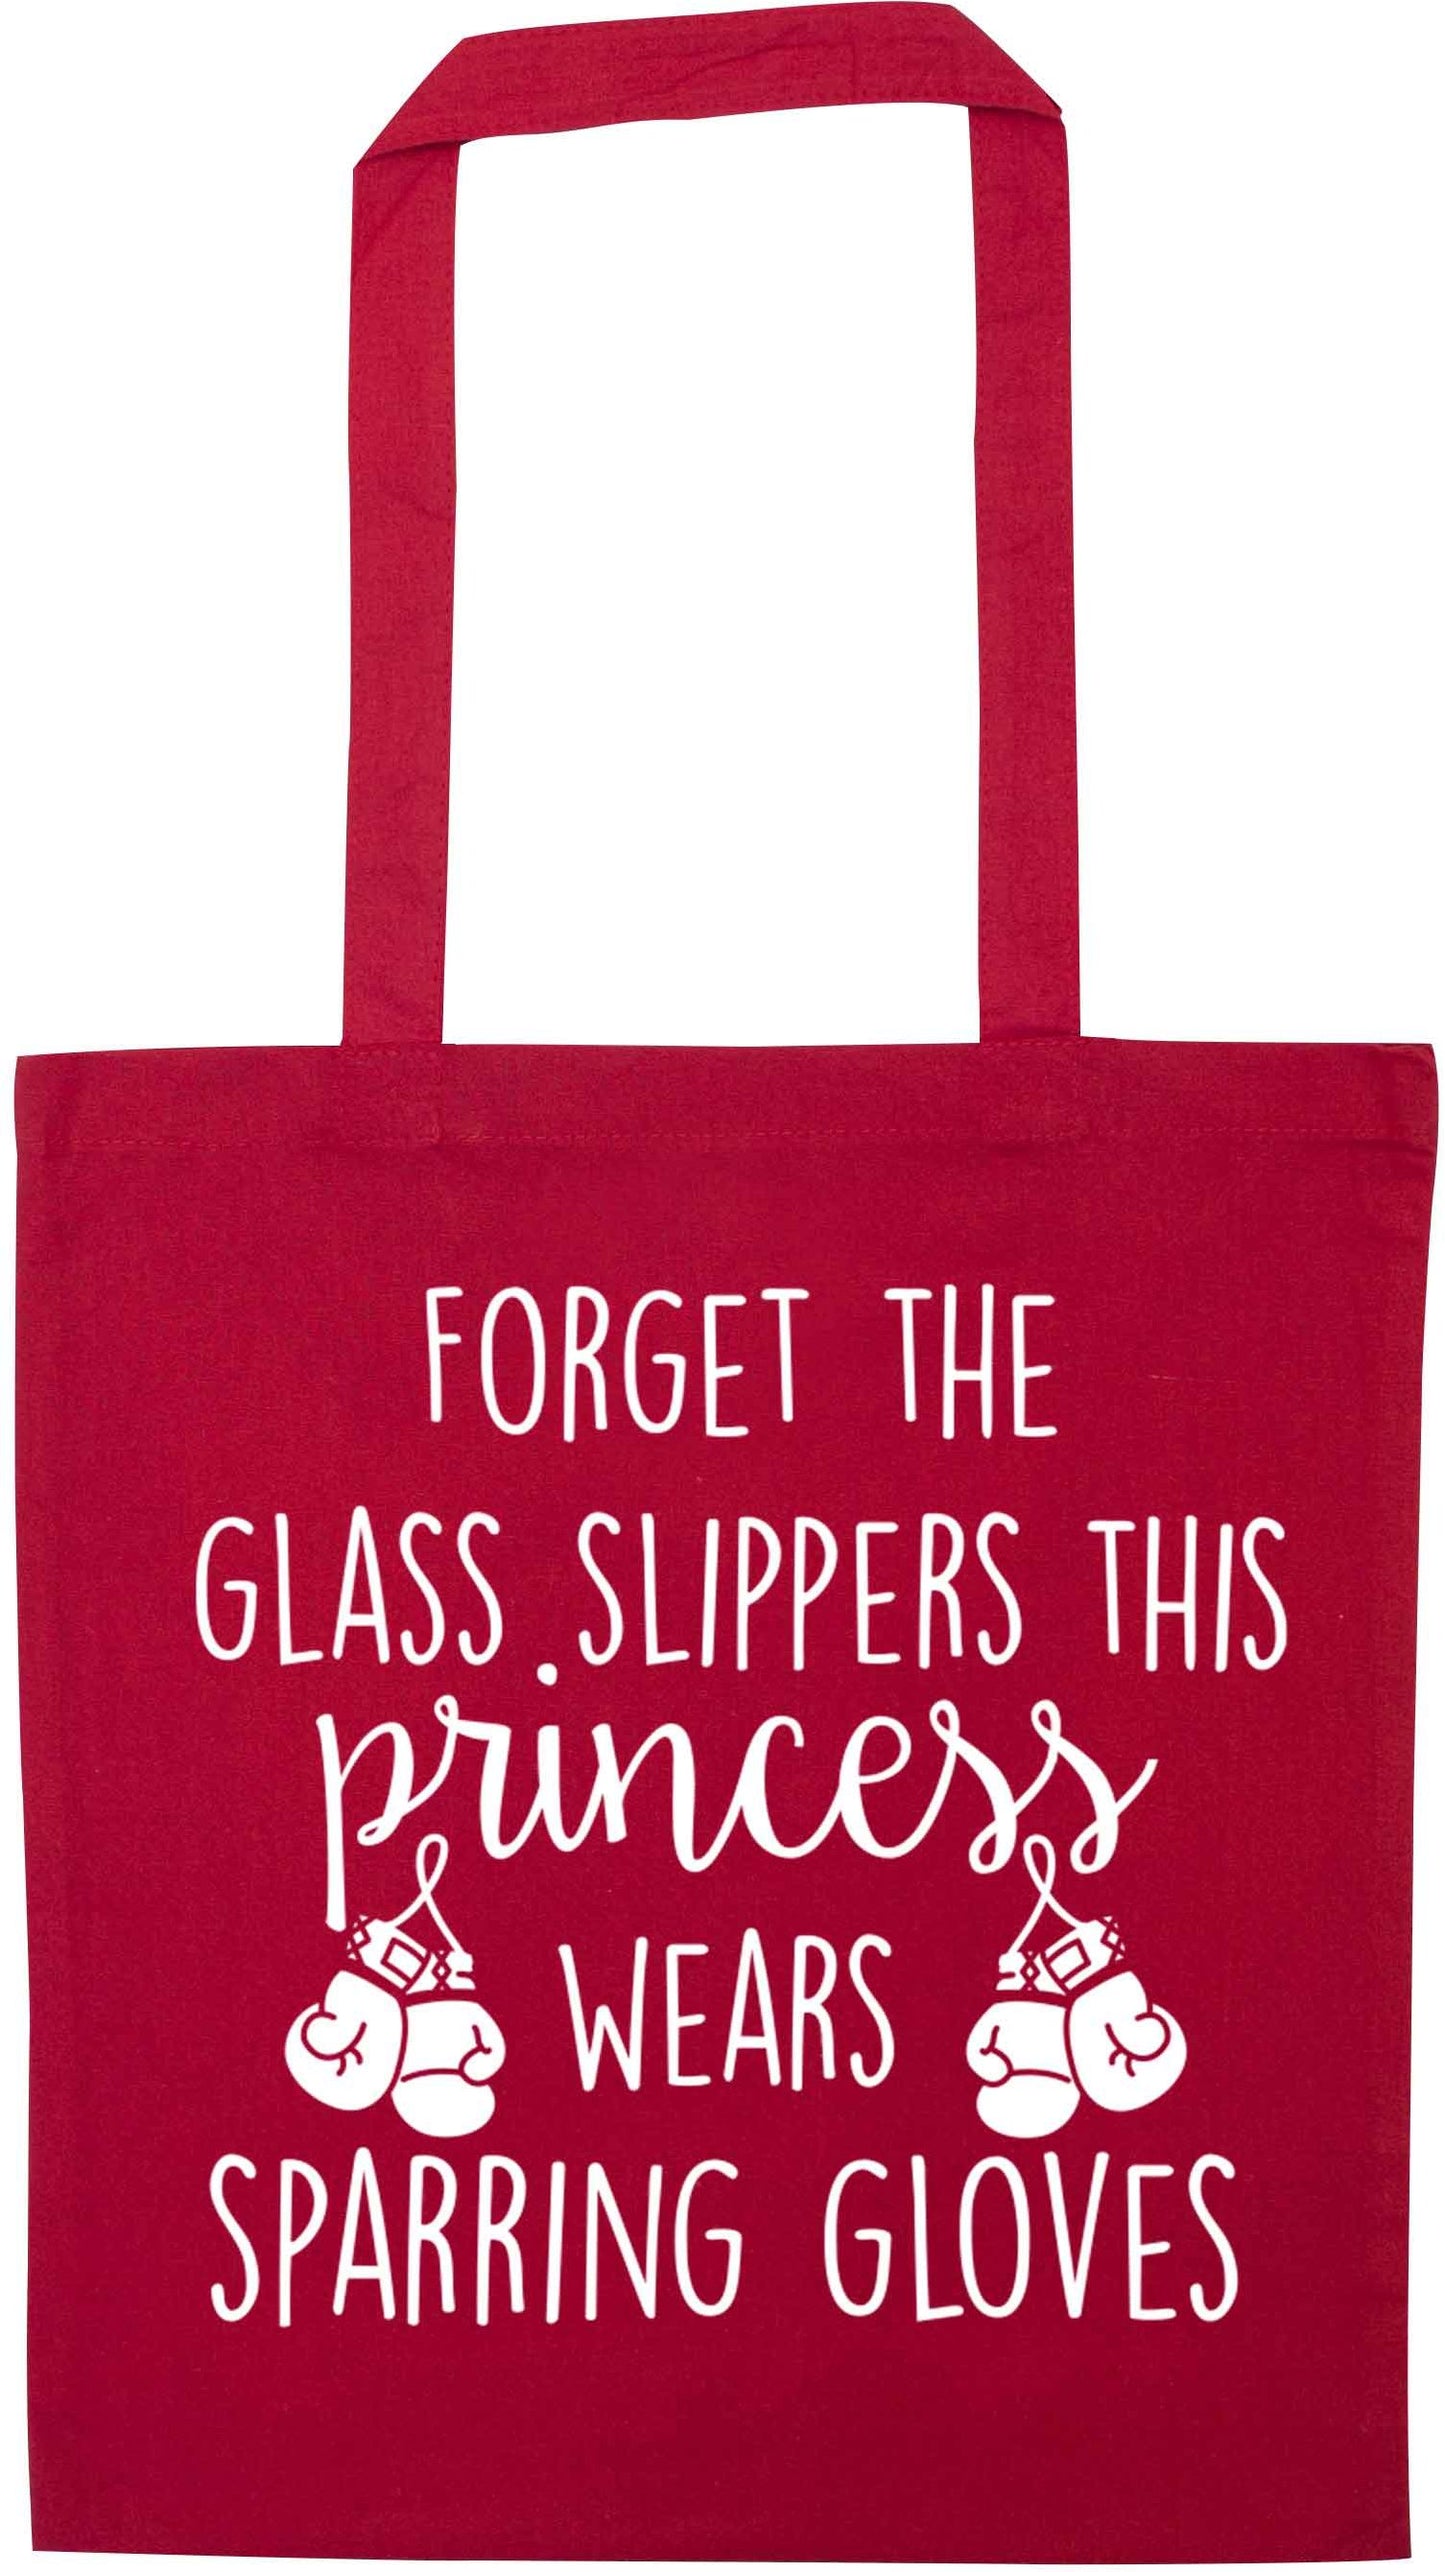 Forget the glass slippers this princess wears sparring gloves red tote bag